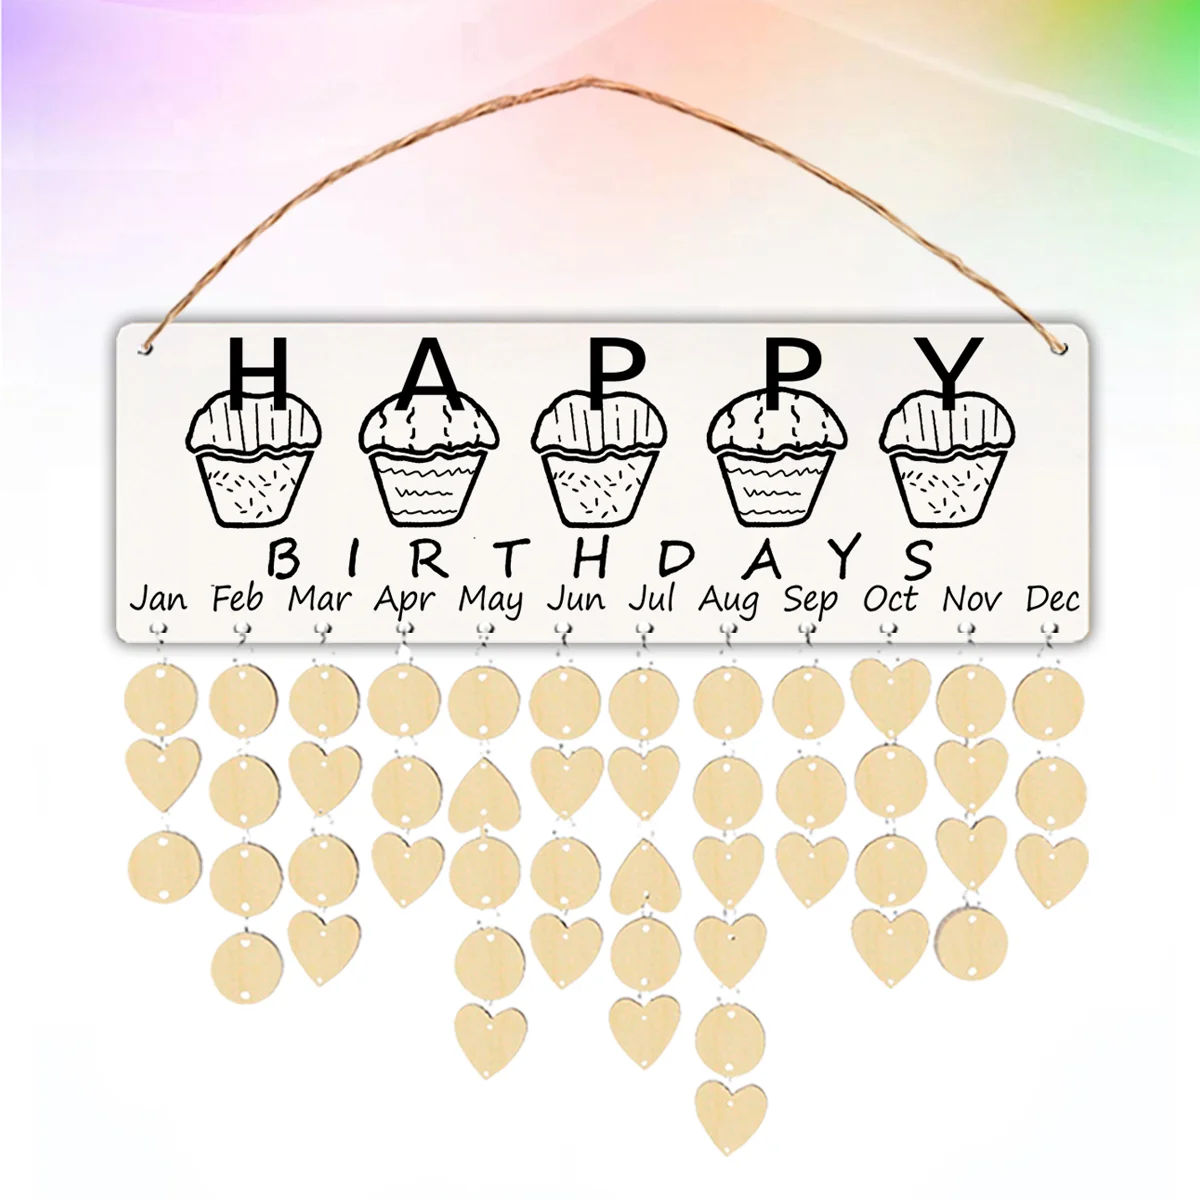 Wooden Birthday Reminder Board DIY Dates Reminder Sign Rope Hanging Events Anniversary Celebration Calendar Wall Plaque with a4 two use double side board table card display stand menu price listing sign holder stand with metal clip